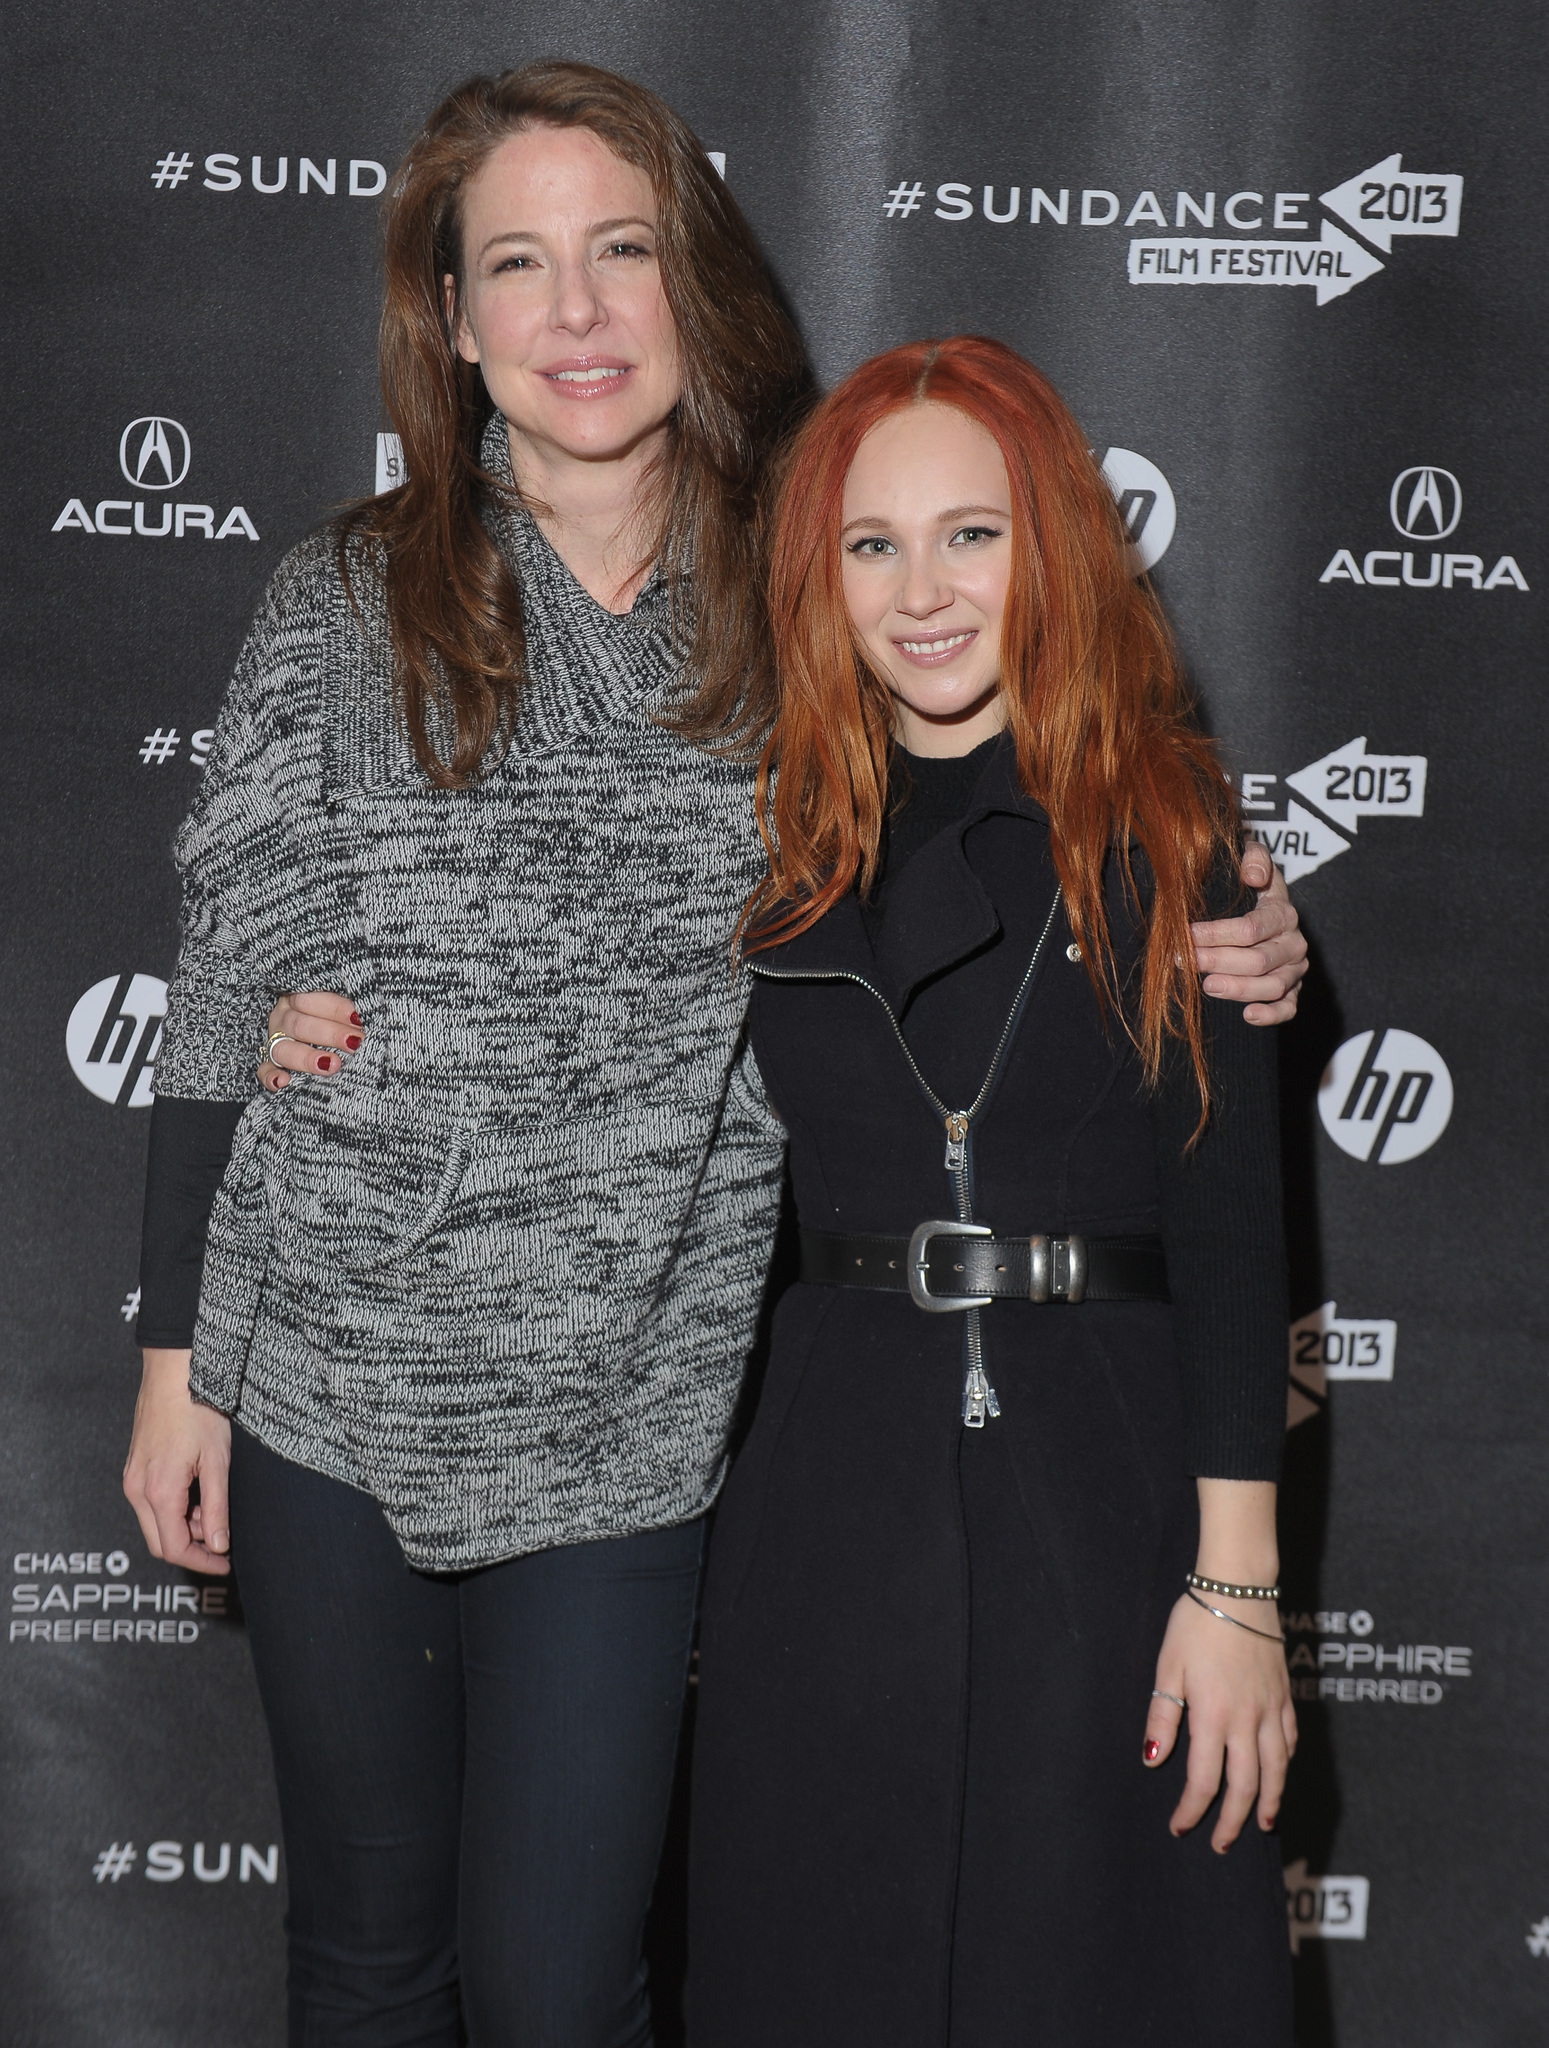 Robin Weigert and Juno Temple